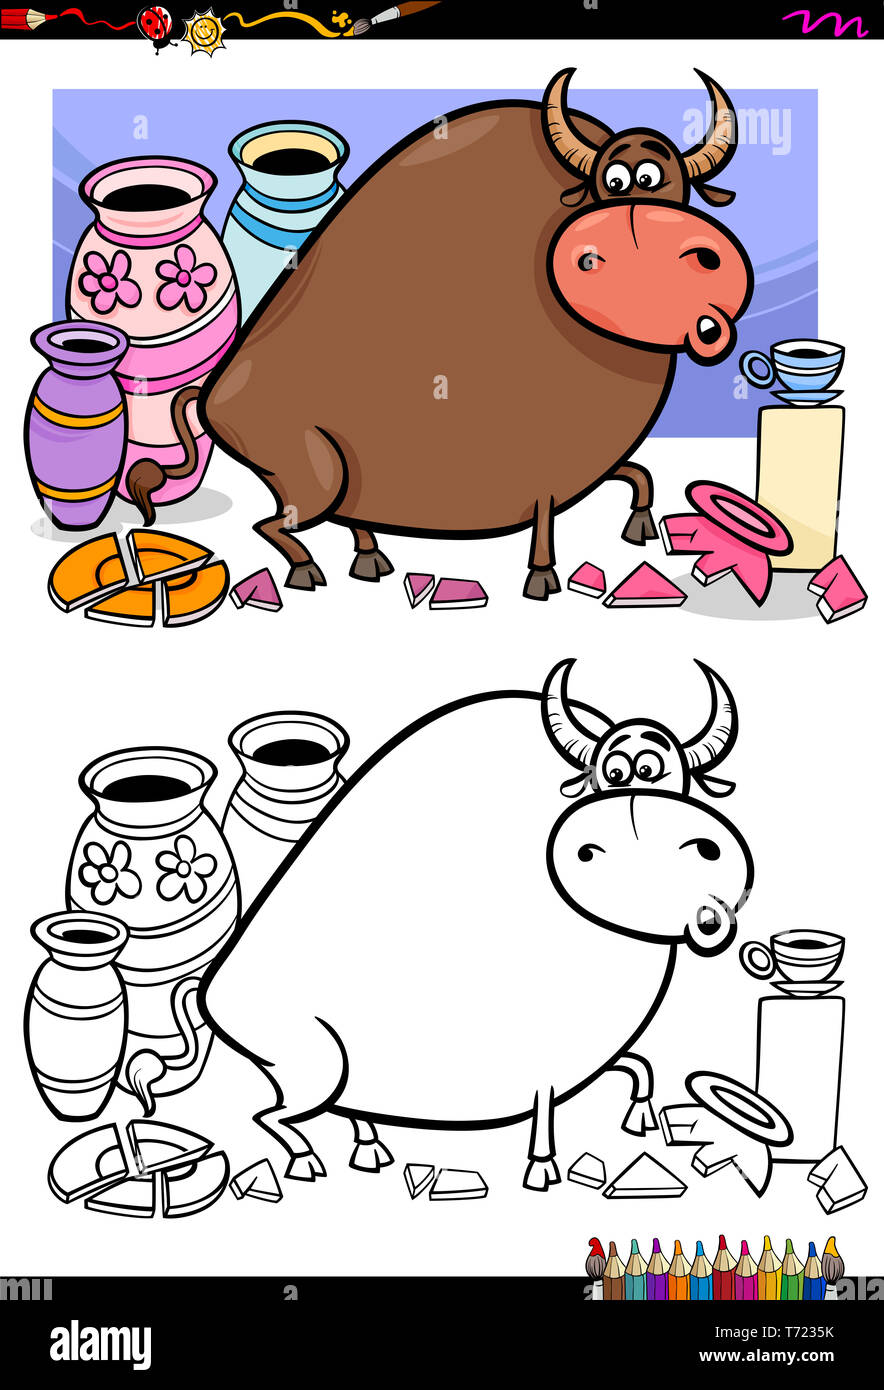 bull in a china shop coloring book Stock Photo